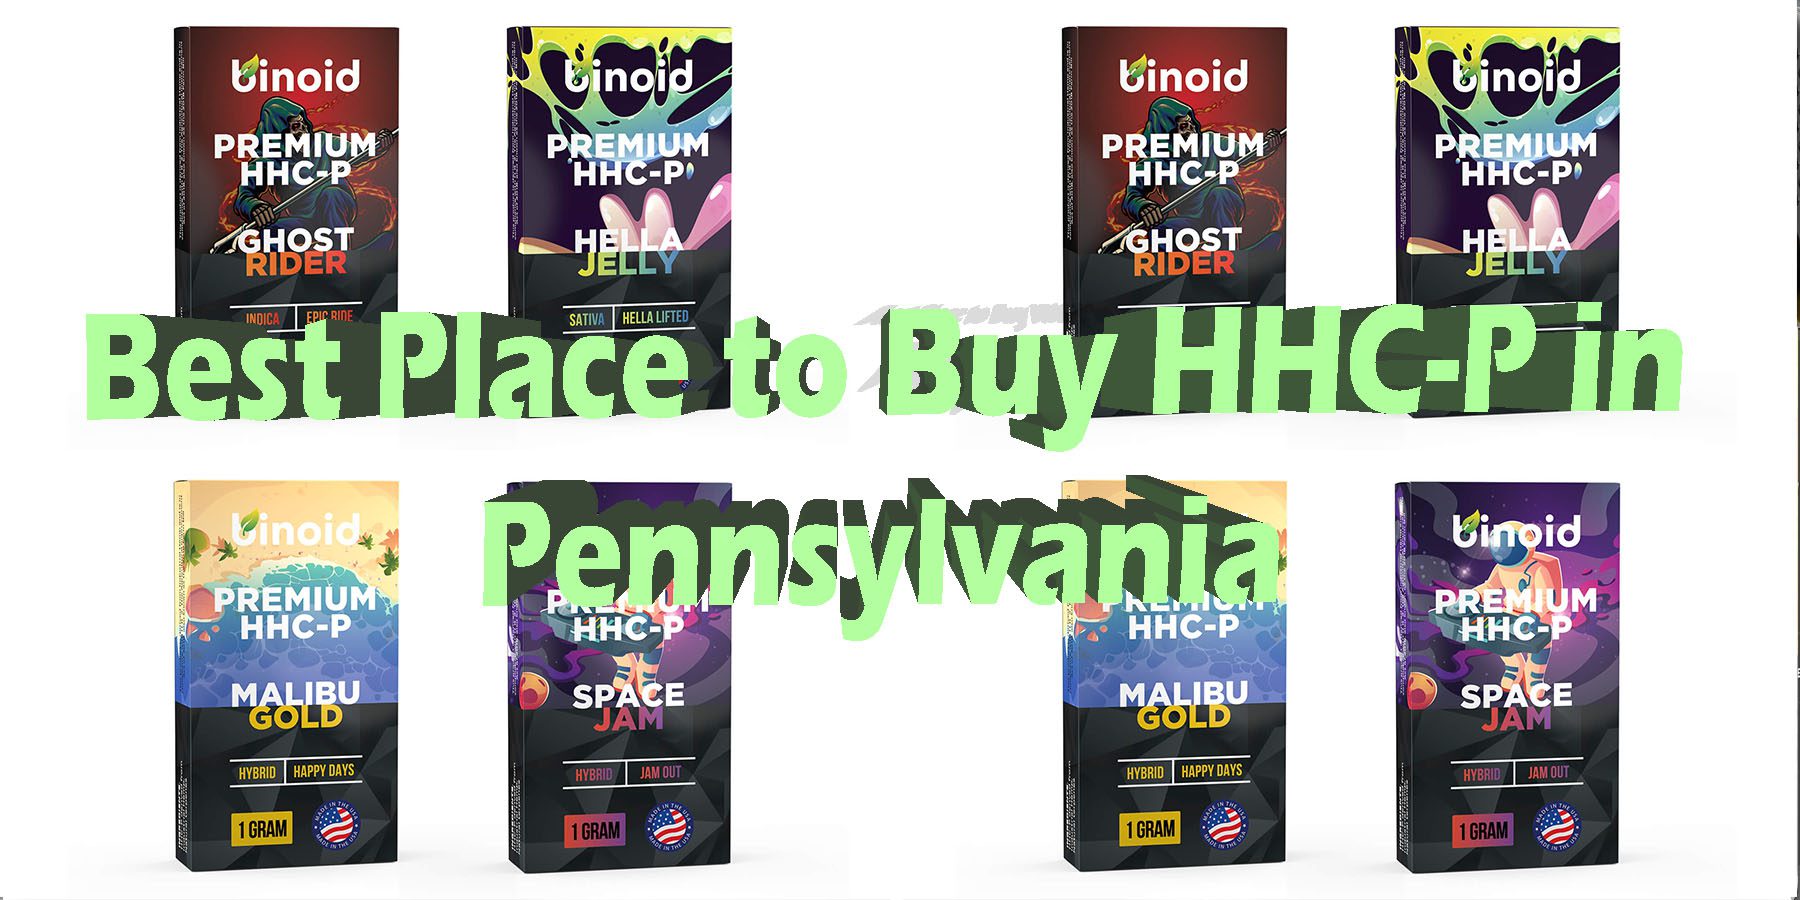 Best Place to Buy HHC P in Pennsylvania HHC P Products HowToGetNearMe BestPlace LowestPrice Coupon Discount For Smoking Best Brand D9 D8 THCA Indoor Good Binoid